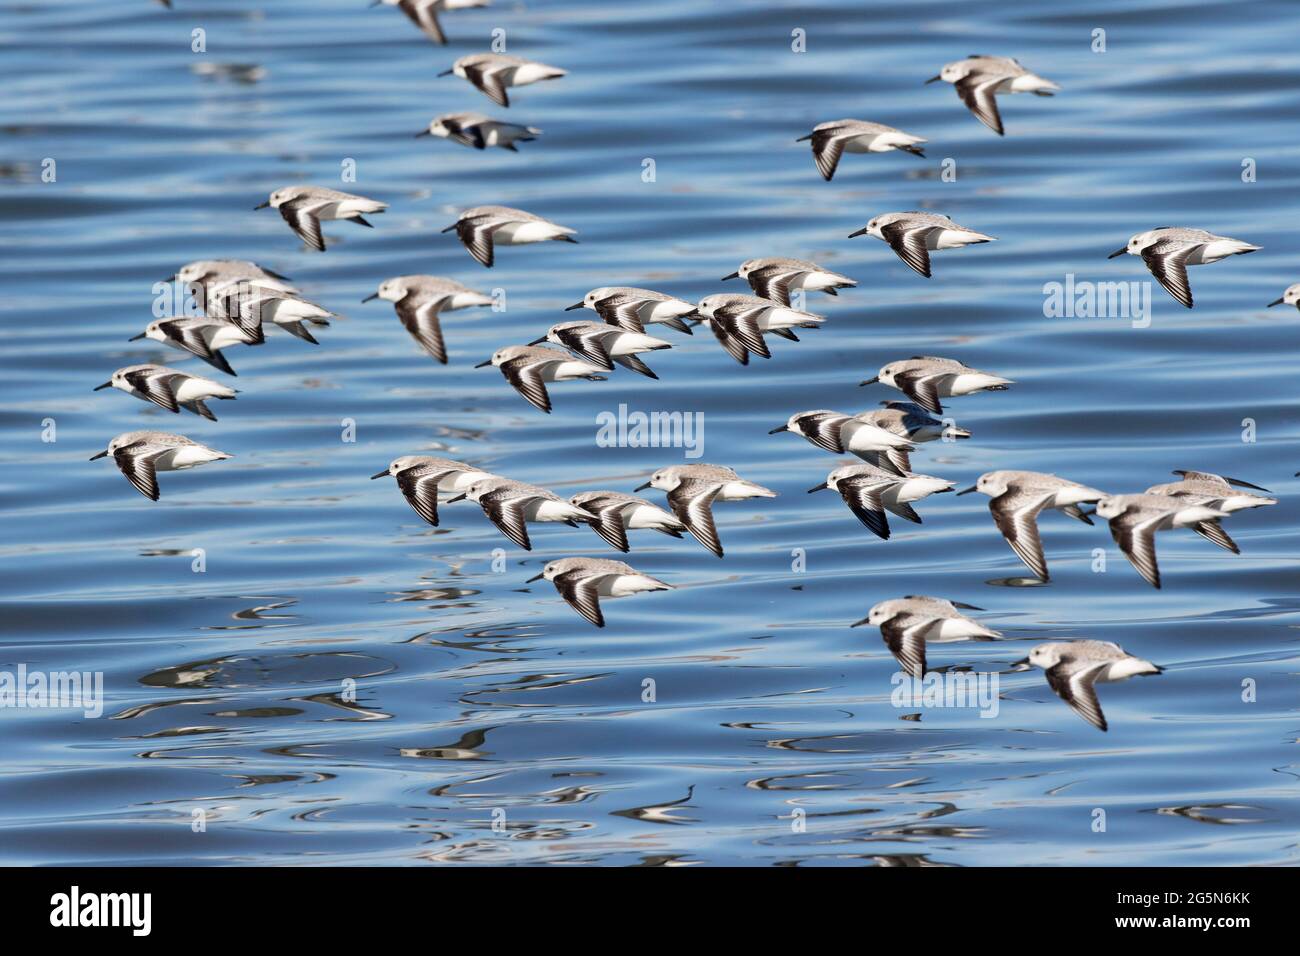 A flock of Sanderlings, Calidris alba, fly low above the shallow water of the Morro Bay, California estuary, an important wintering area. Stock Photo